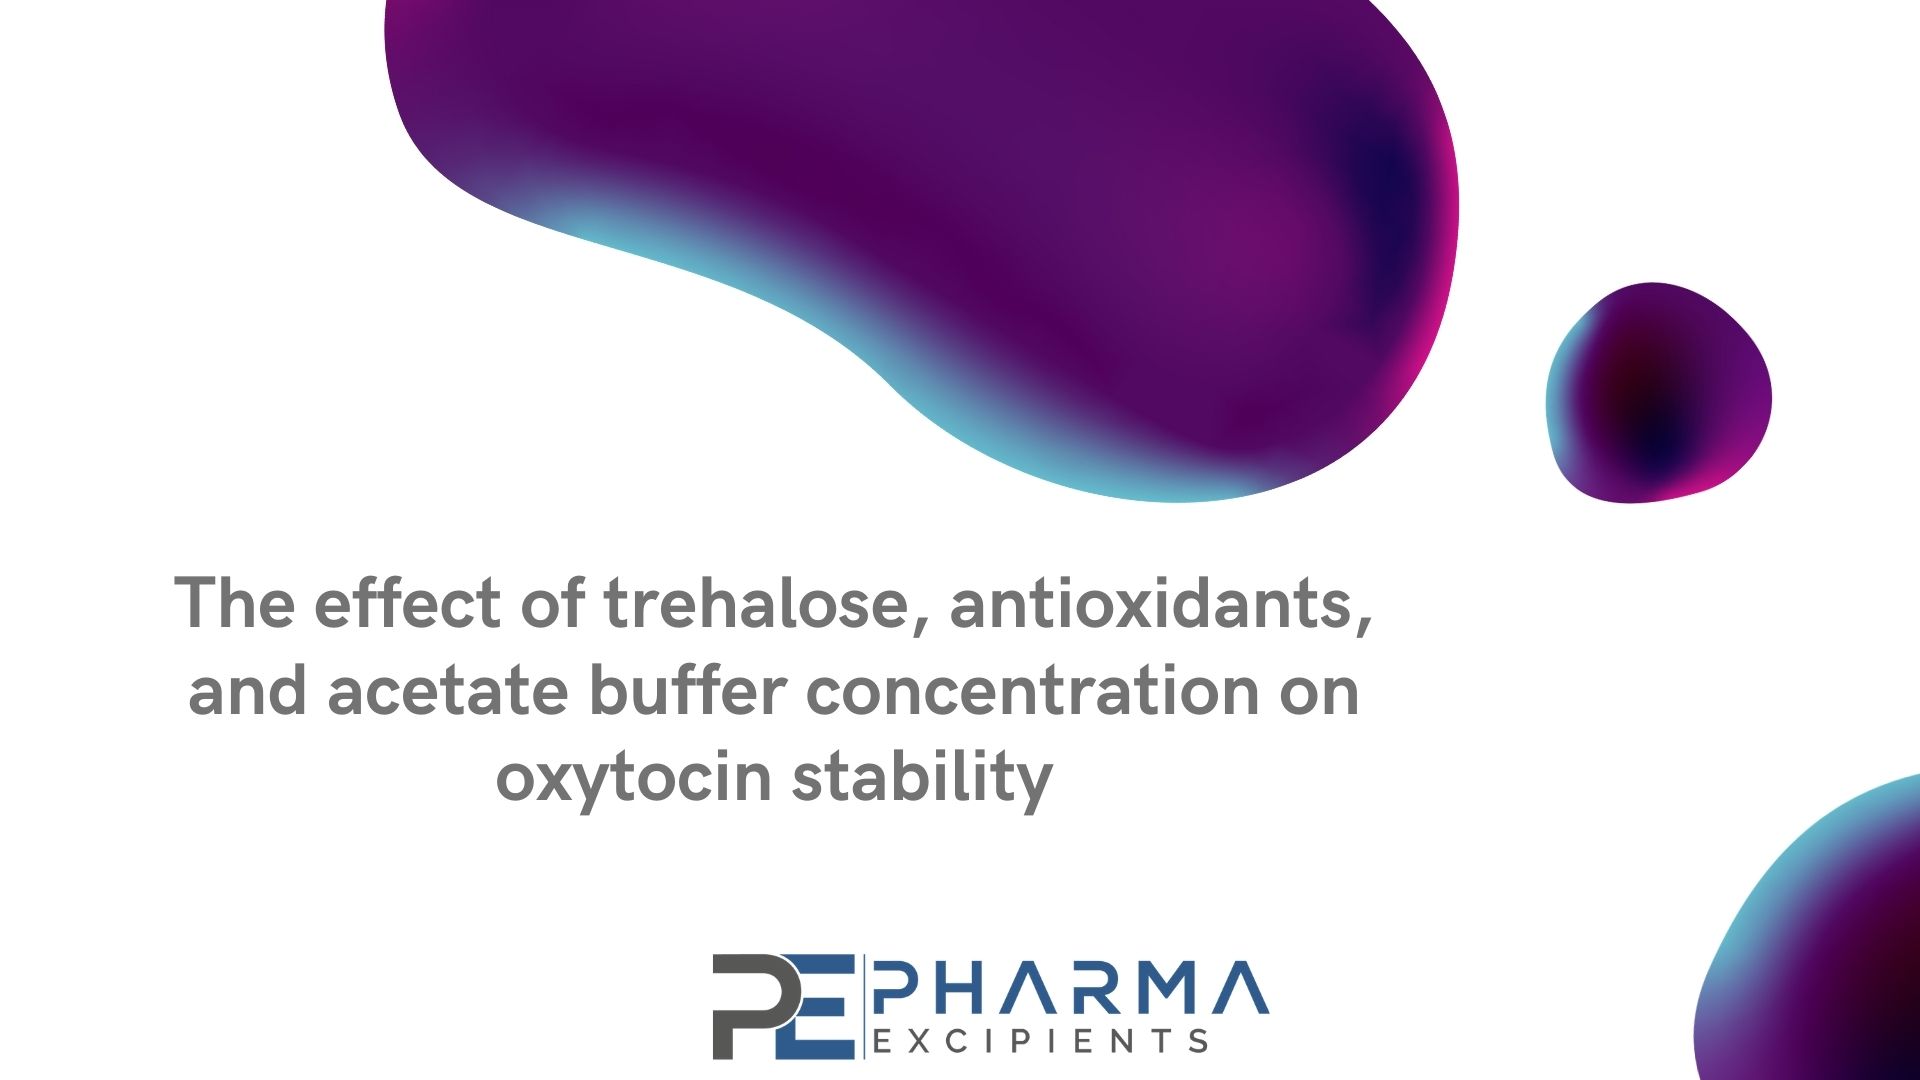 The effect of trehalose, antioxidants, and acetate buffer concentration on oxytocin stability